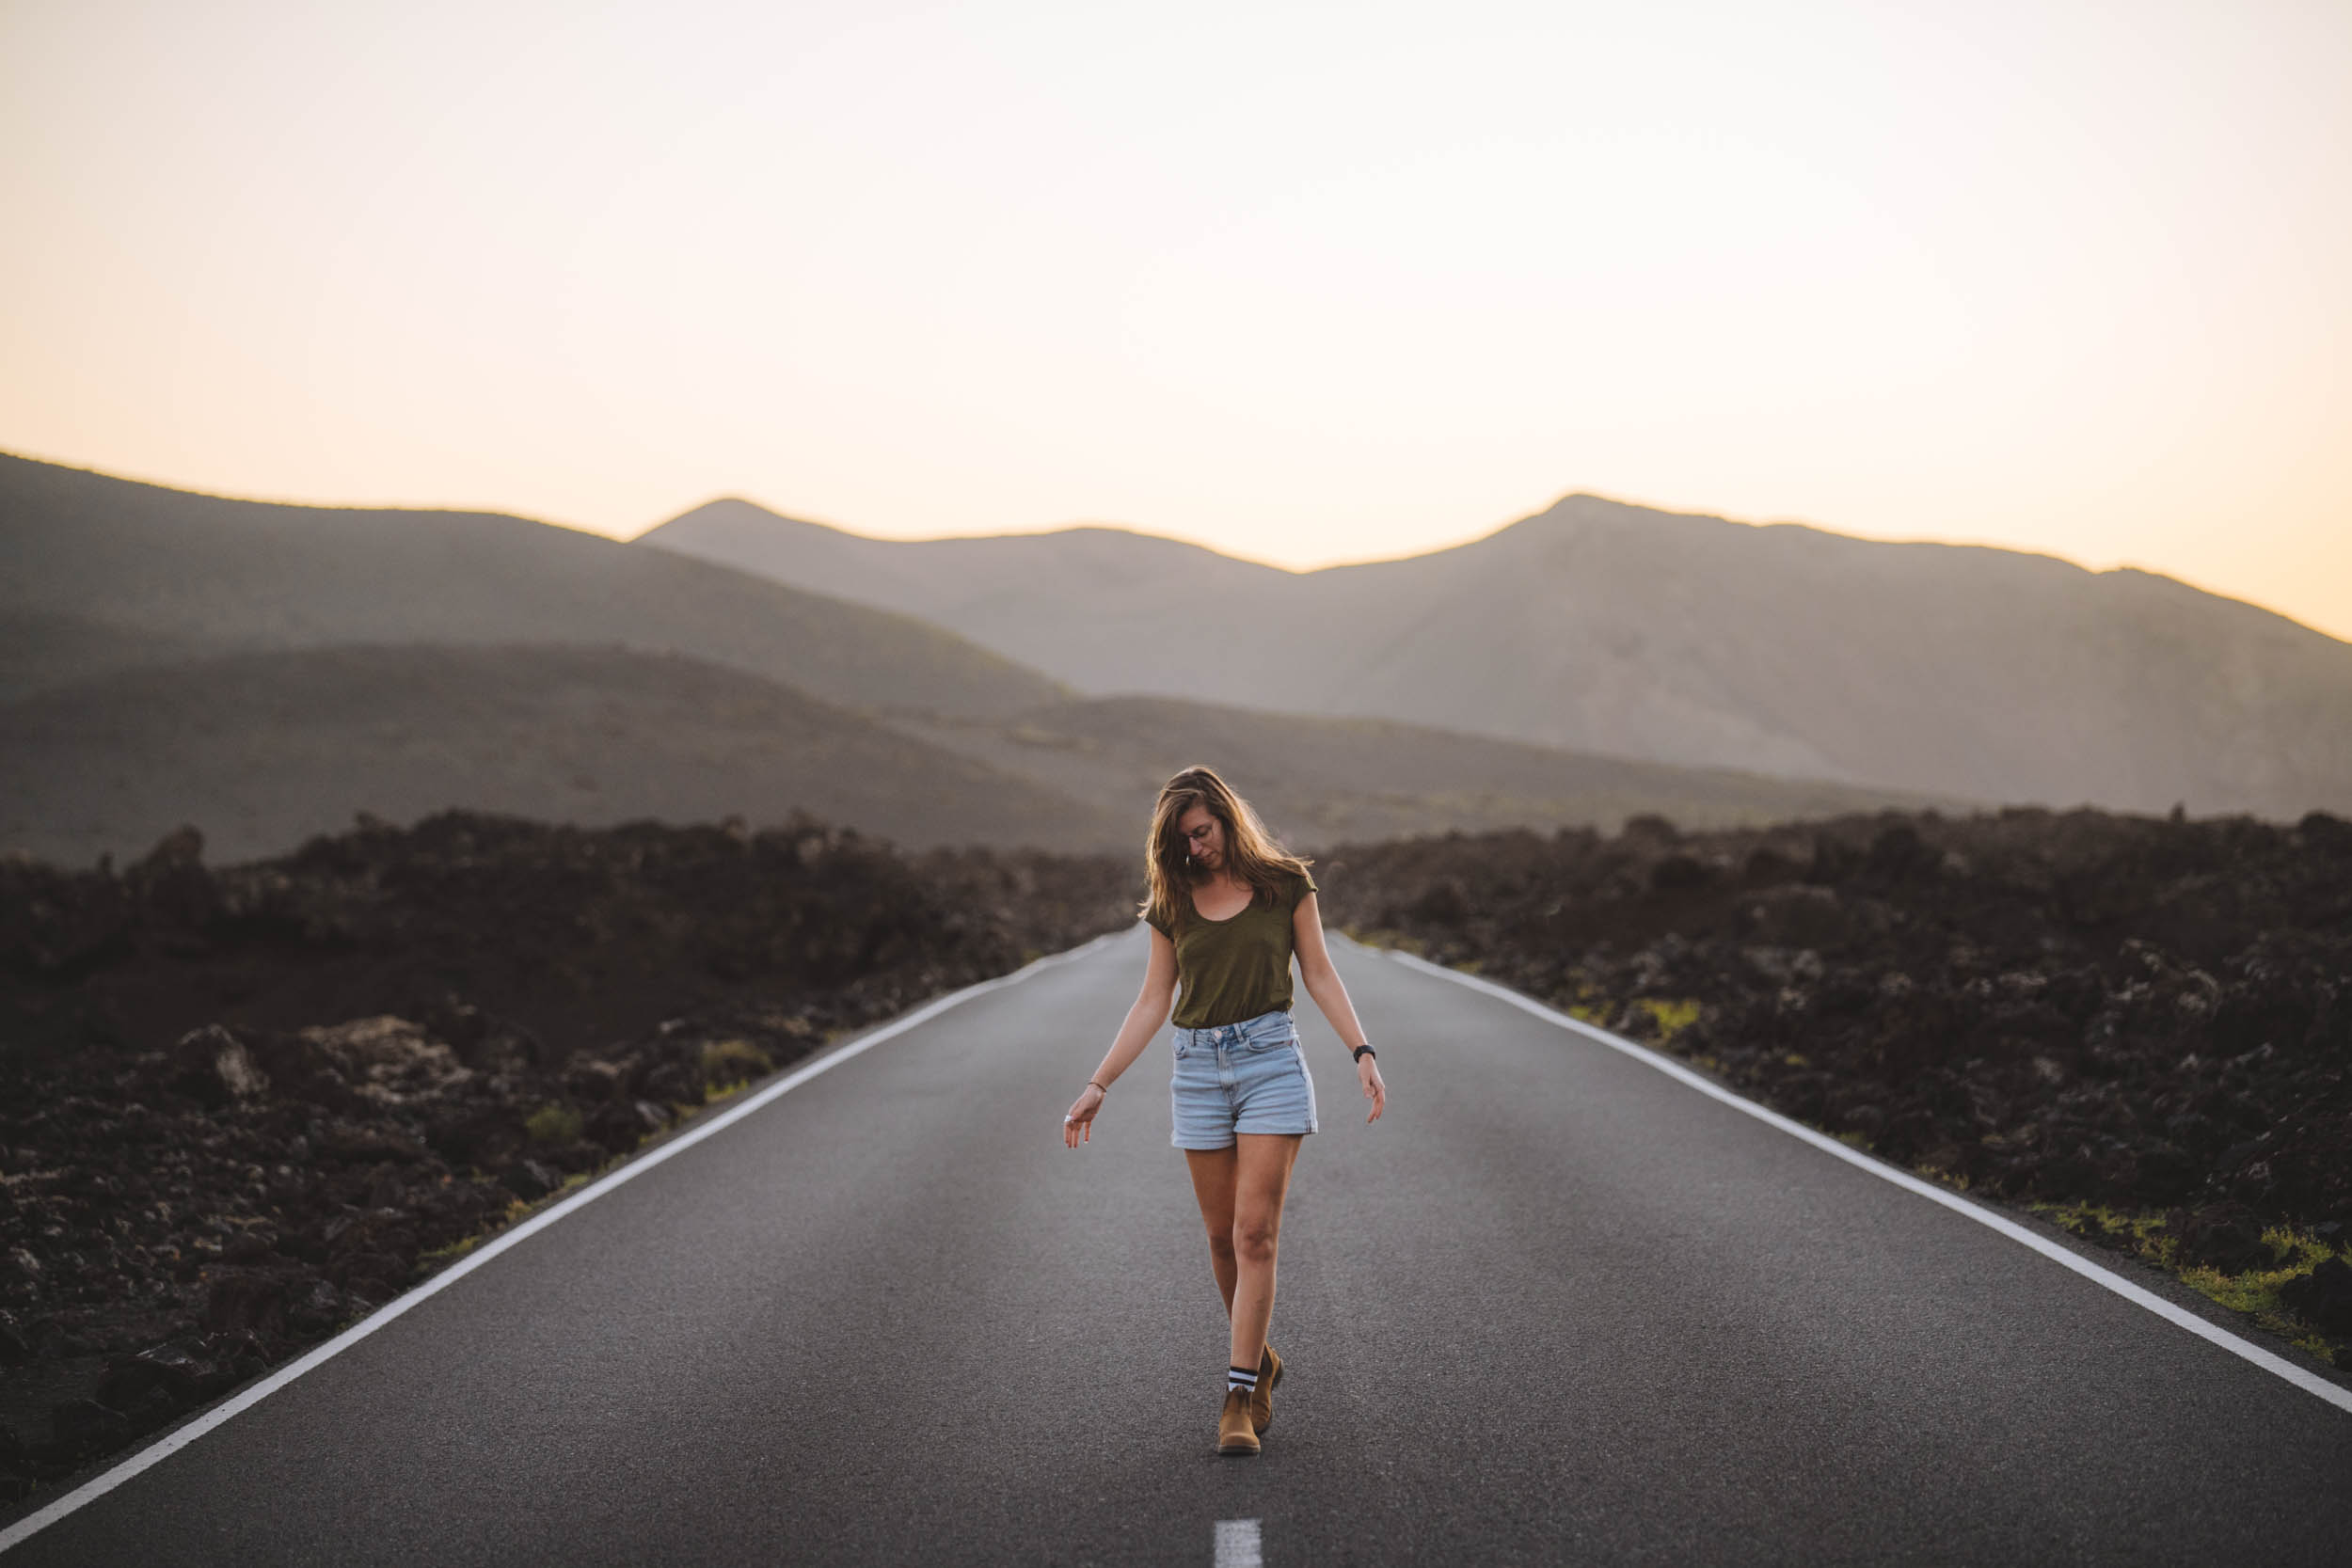 kelly posing on a road in Lanzarote during sunset